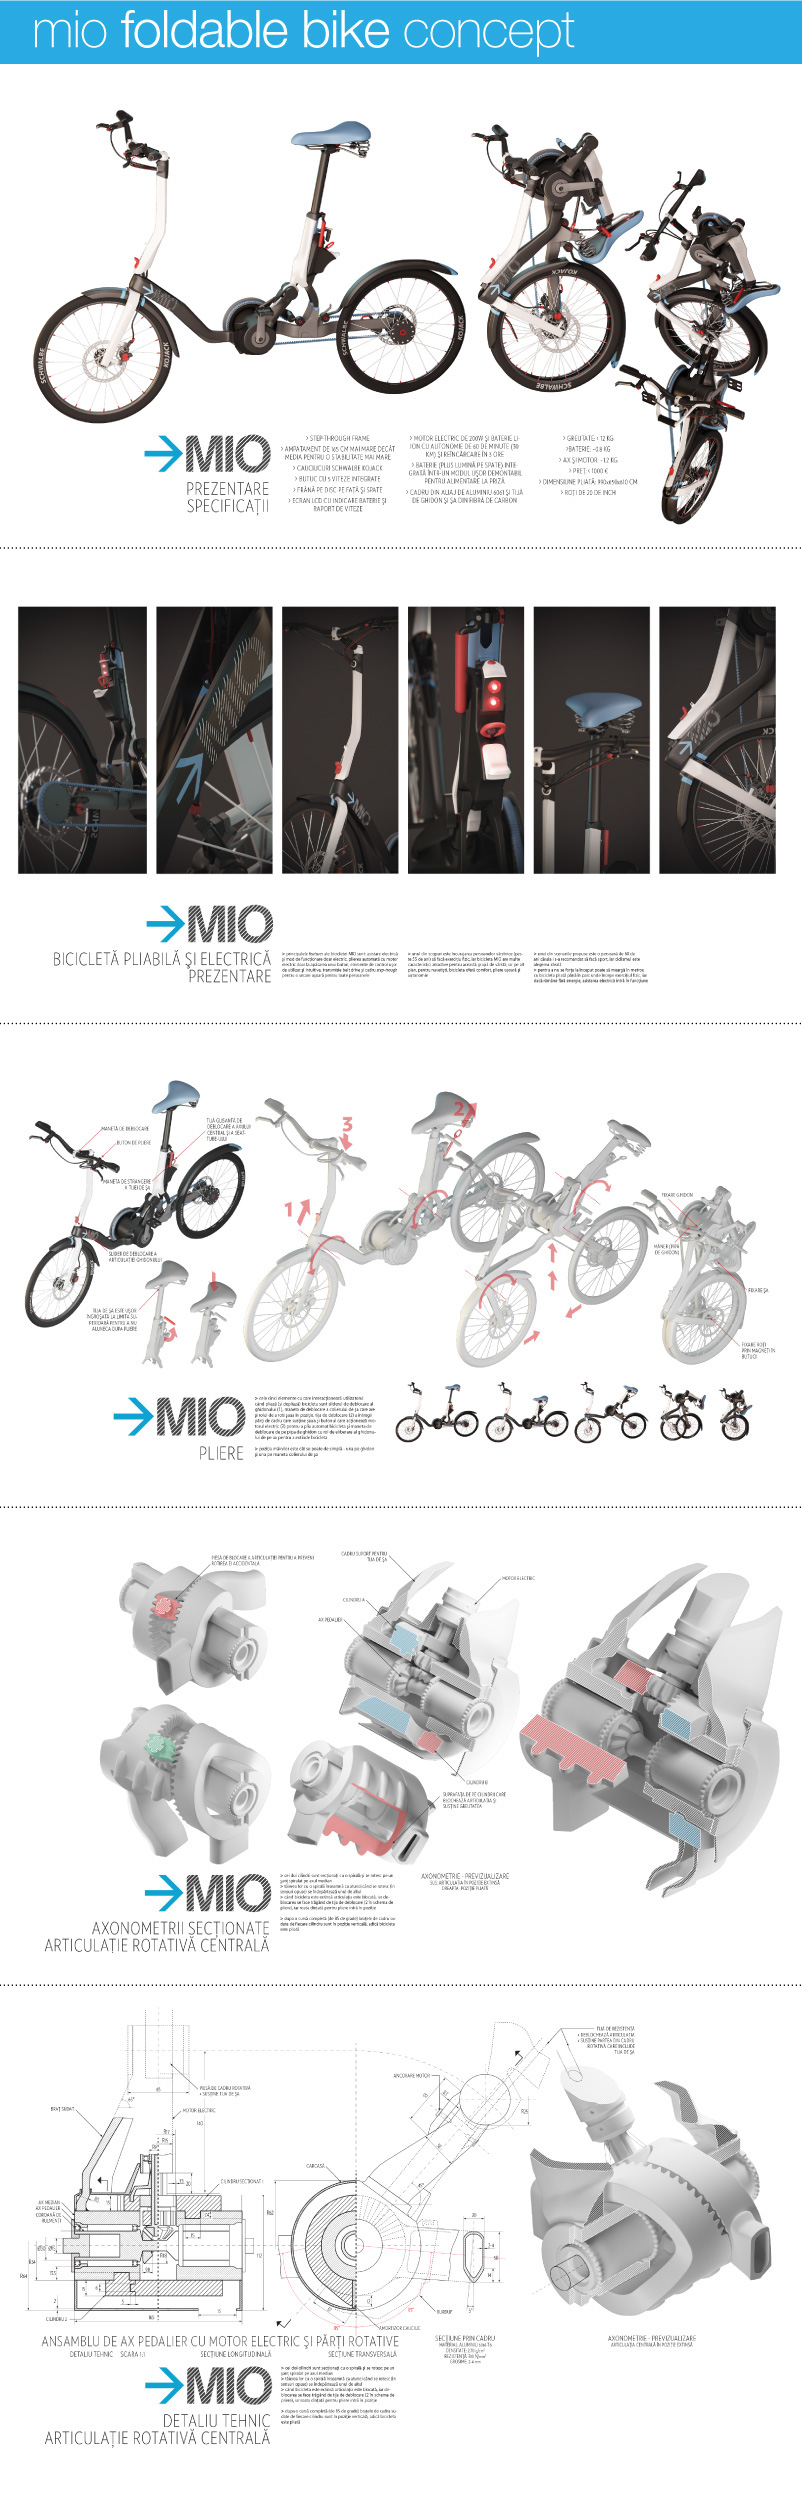 Bicycle  Folding Bicycle  Folding self-folding Bicycle Design Foldable  foldable bicycle electric bicycle  city bicycle  commuter bicycle